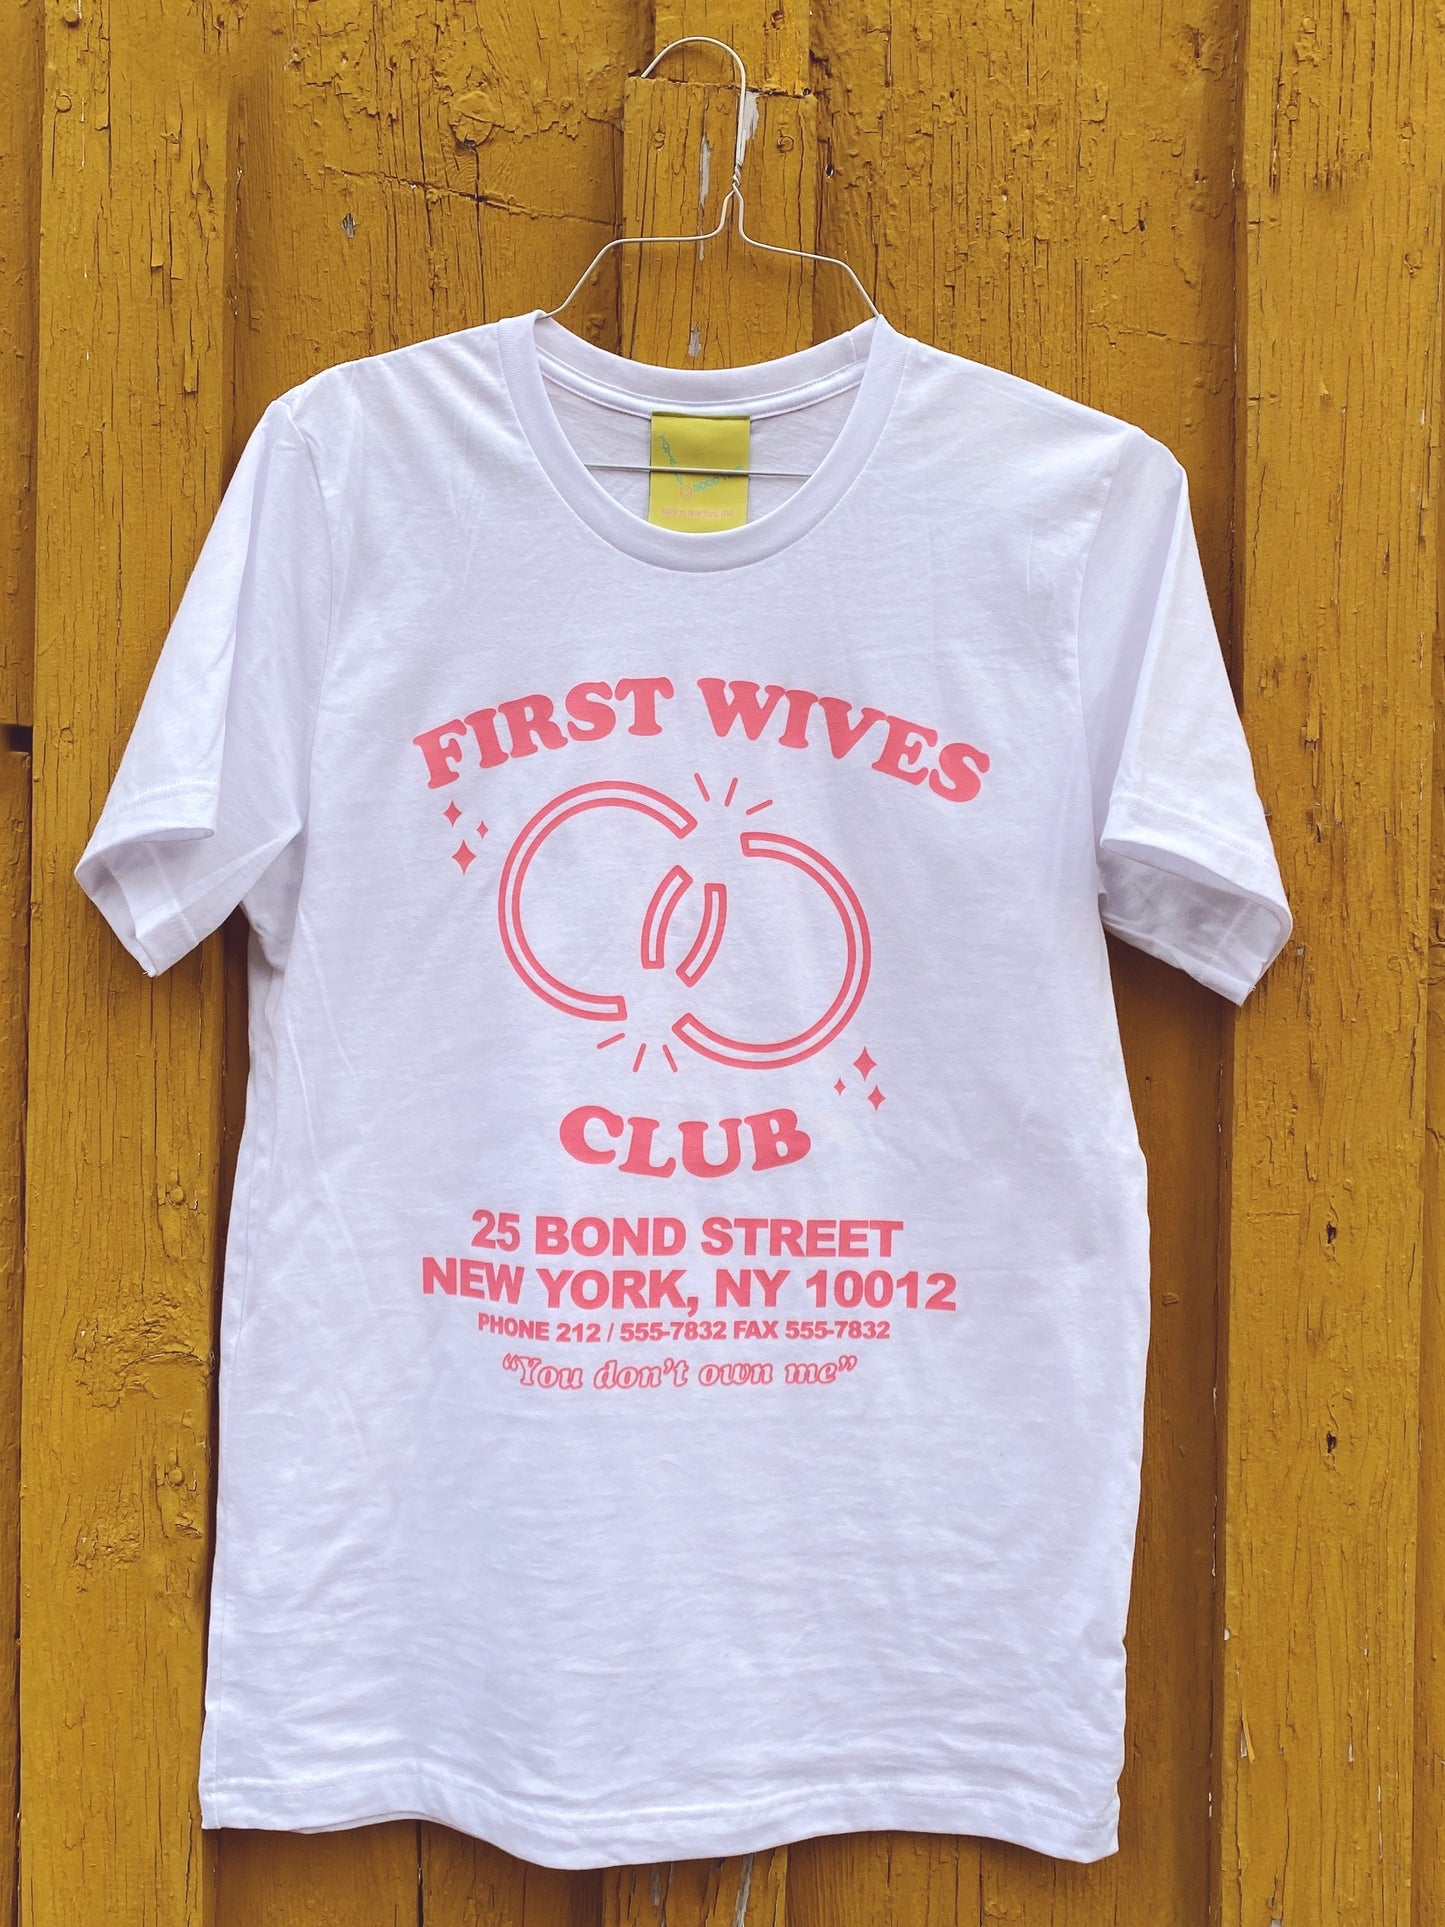 First Wives Club Tee